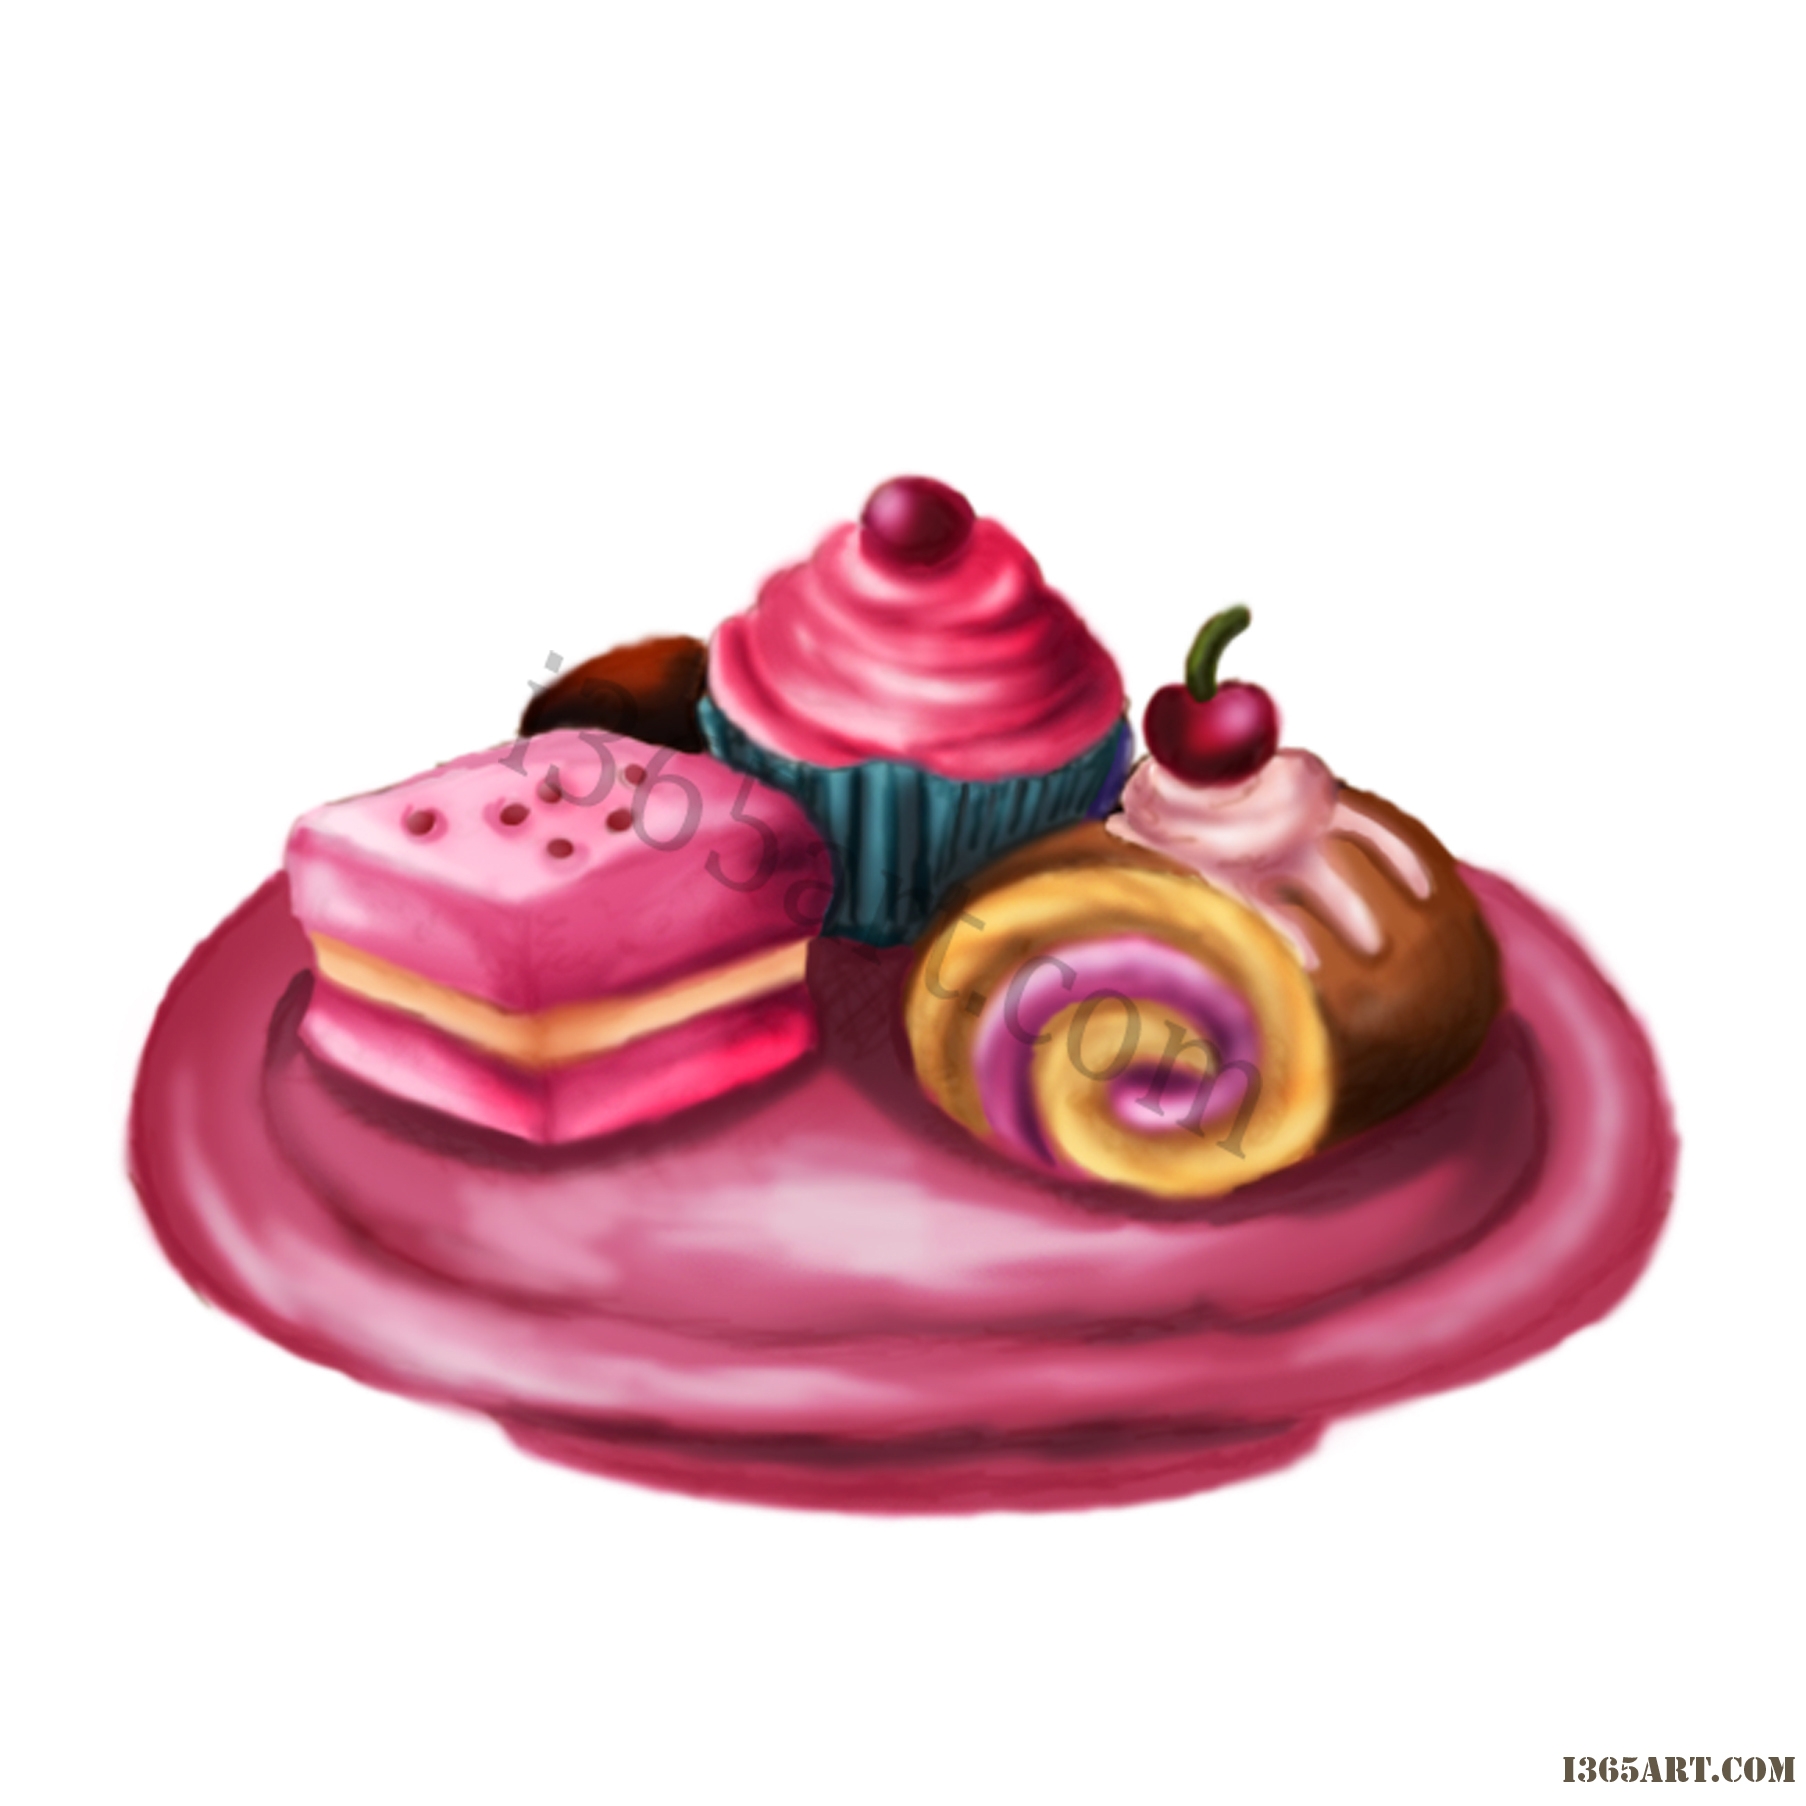 Day 3 Day   64 Think Pink  Drawings Of Yummies